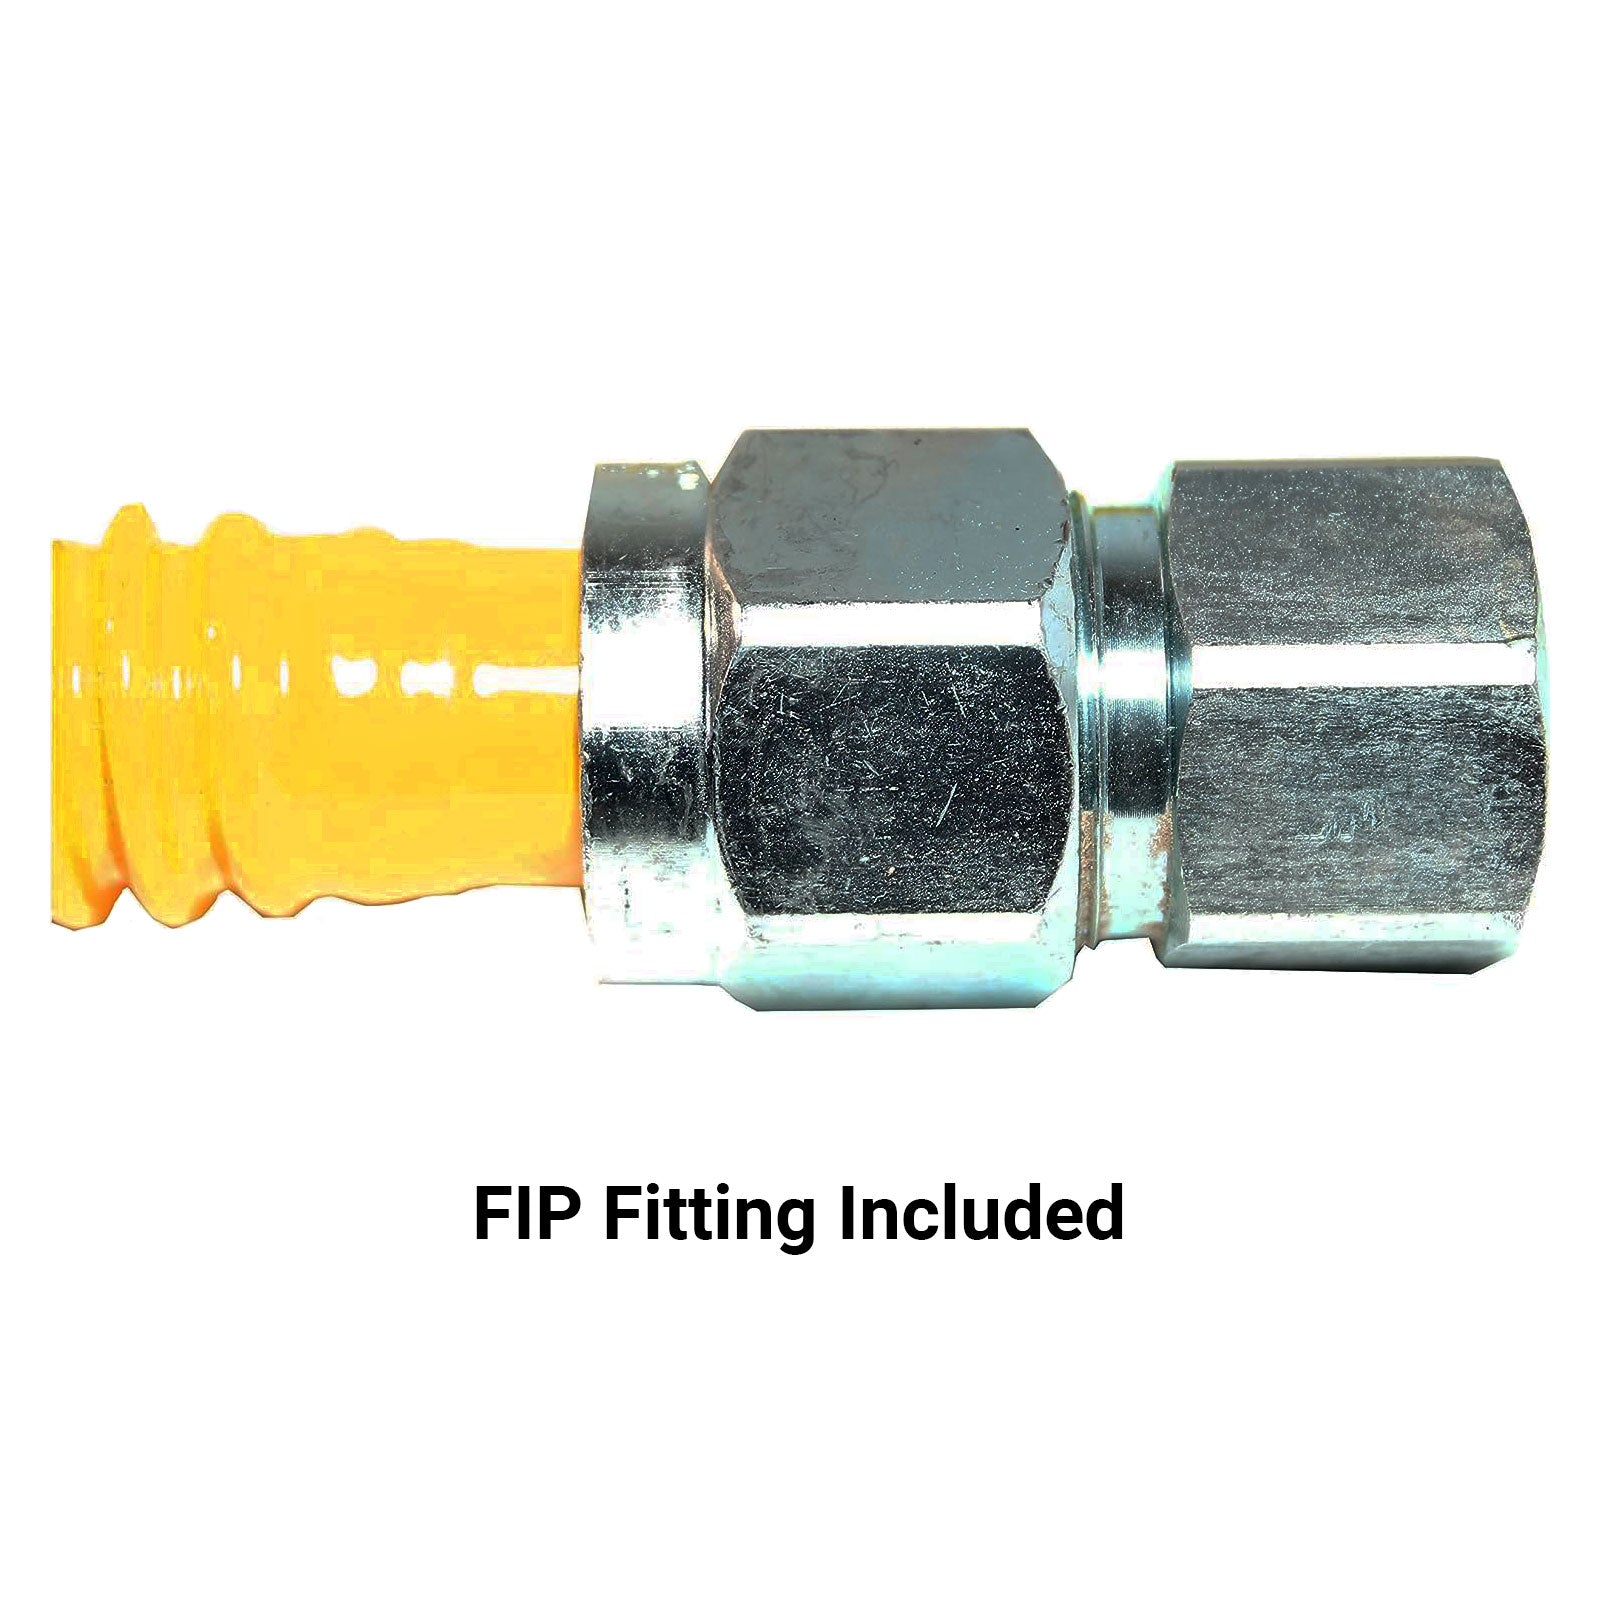 1/2" OD x 60", 1/2" FIP x 1/2" MIP Epoxy Coated Stainless Steel Gas Connector, CSA